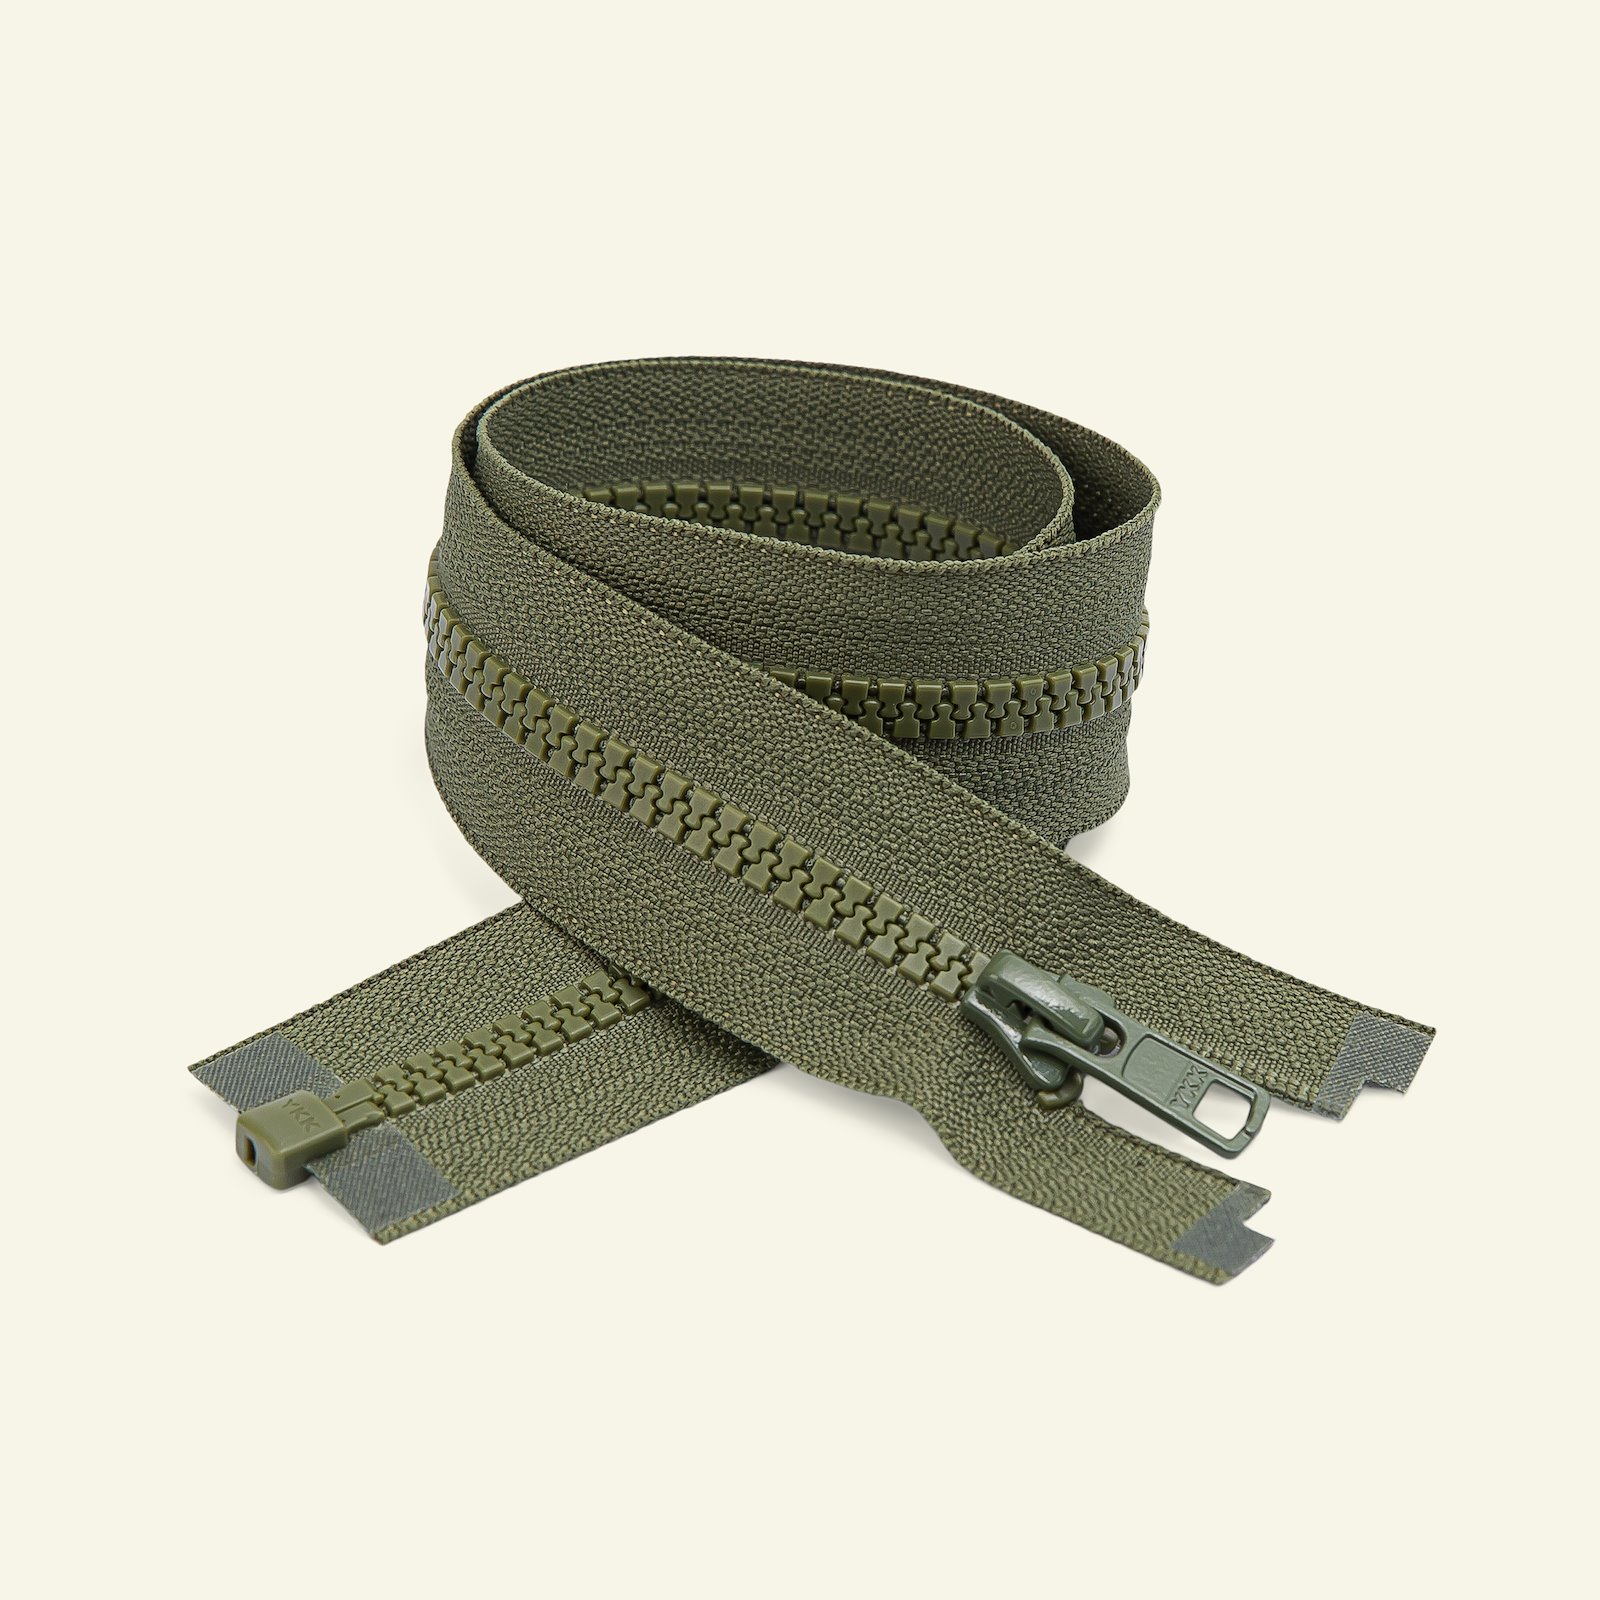 YKK zip 6mm open end 60cm army x50033_pack